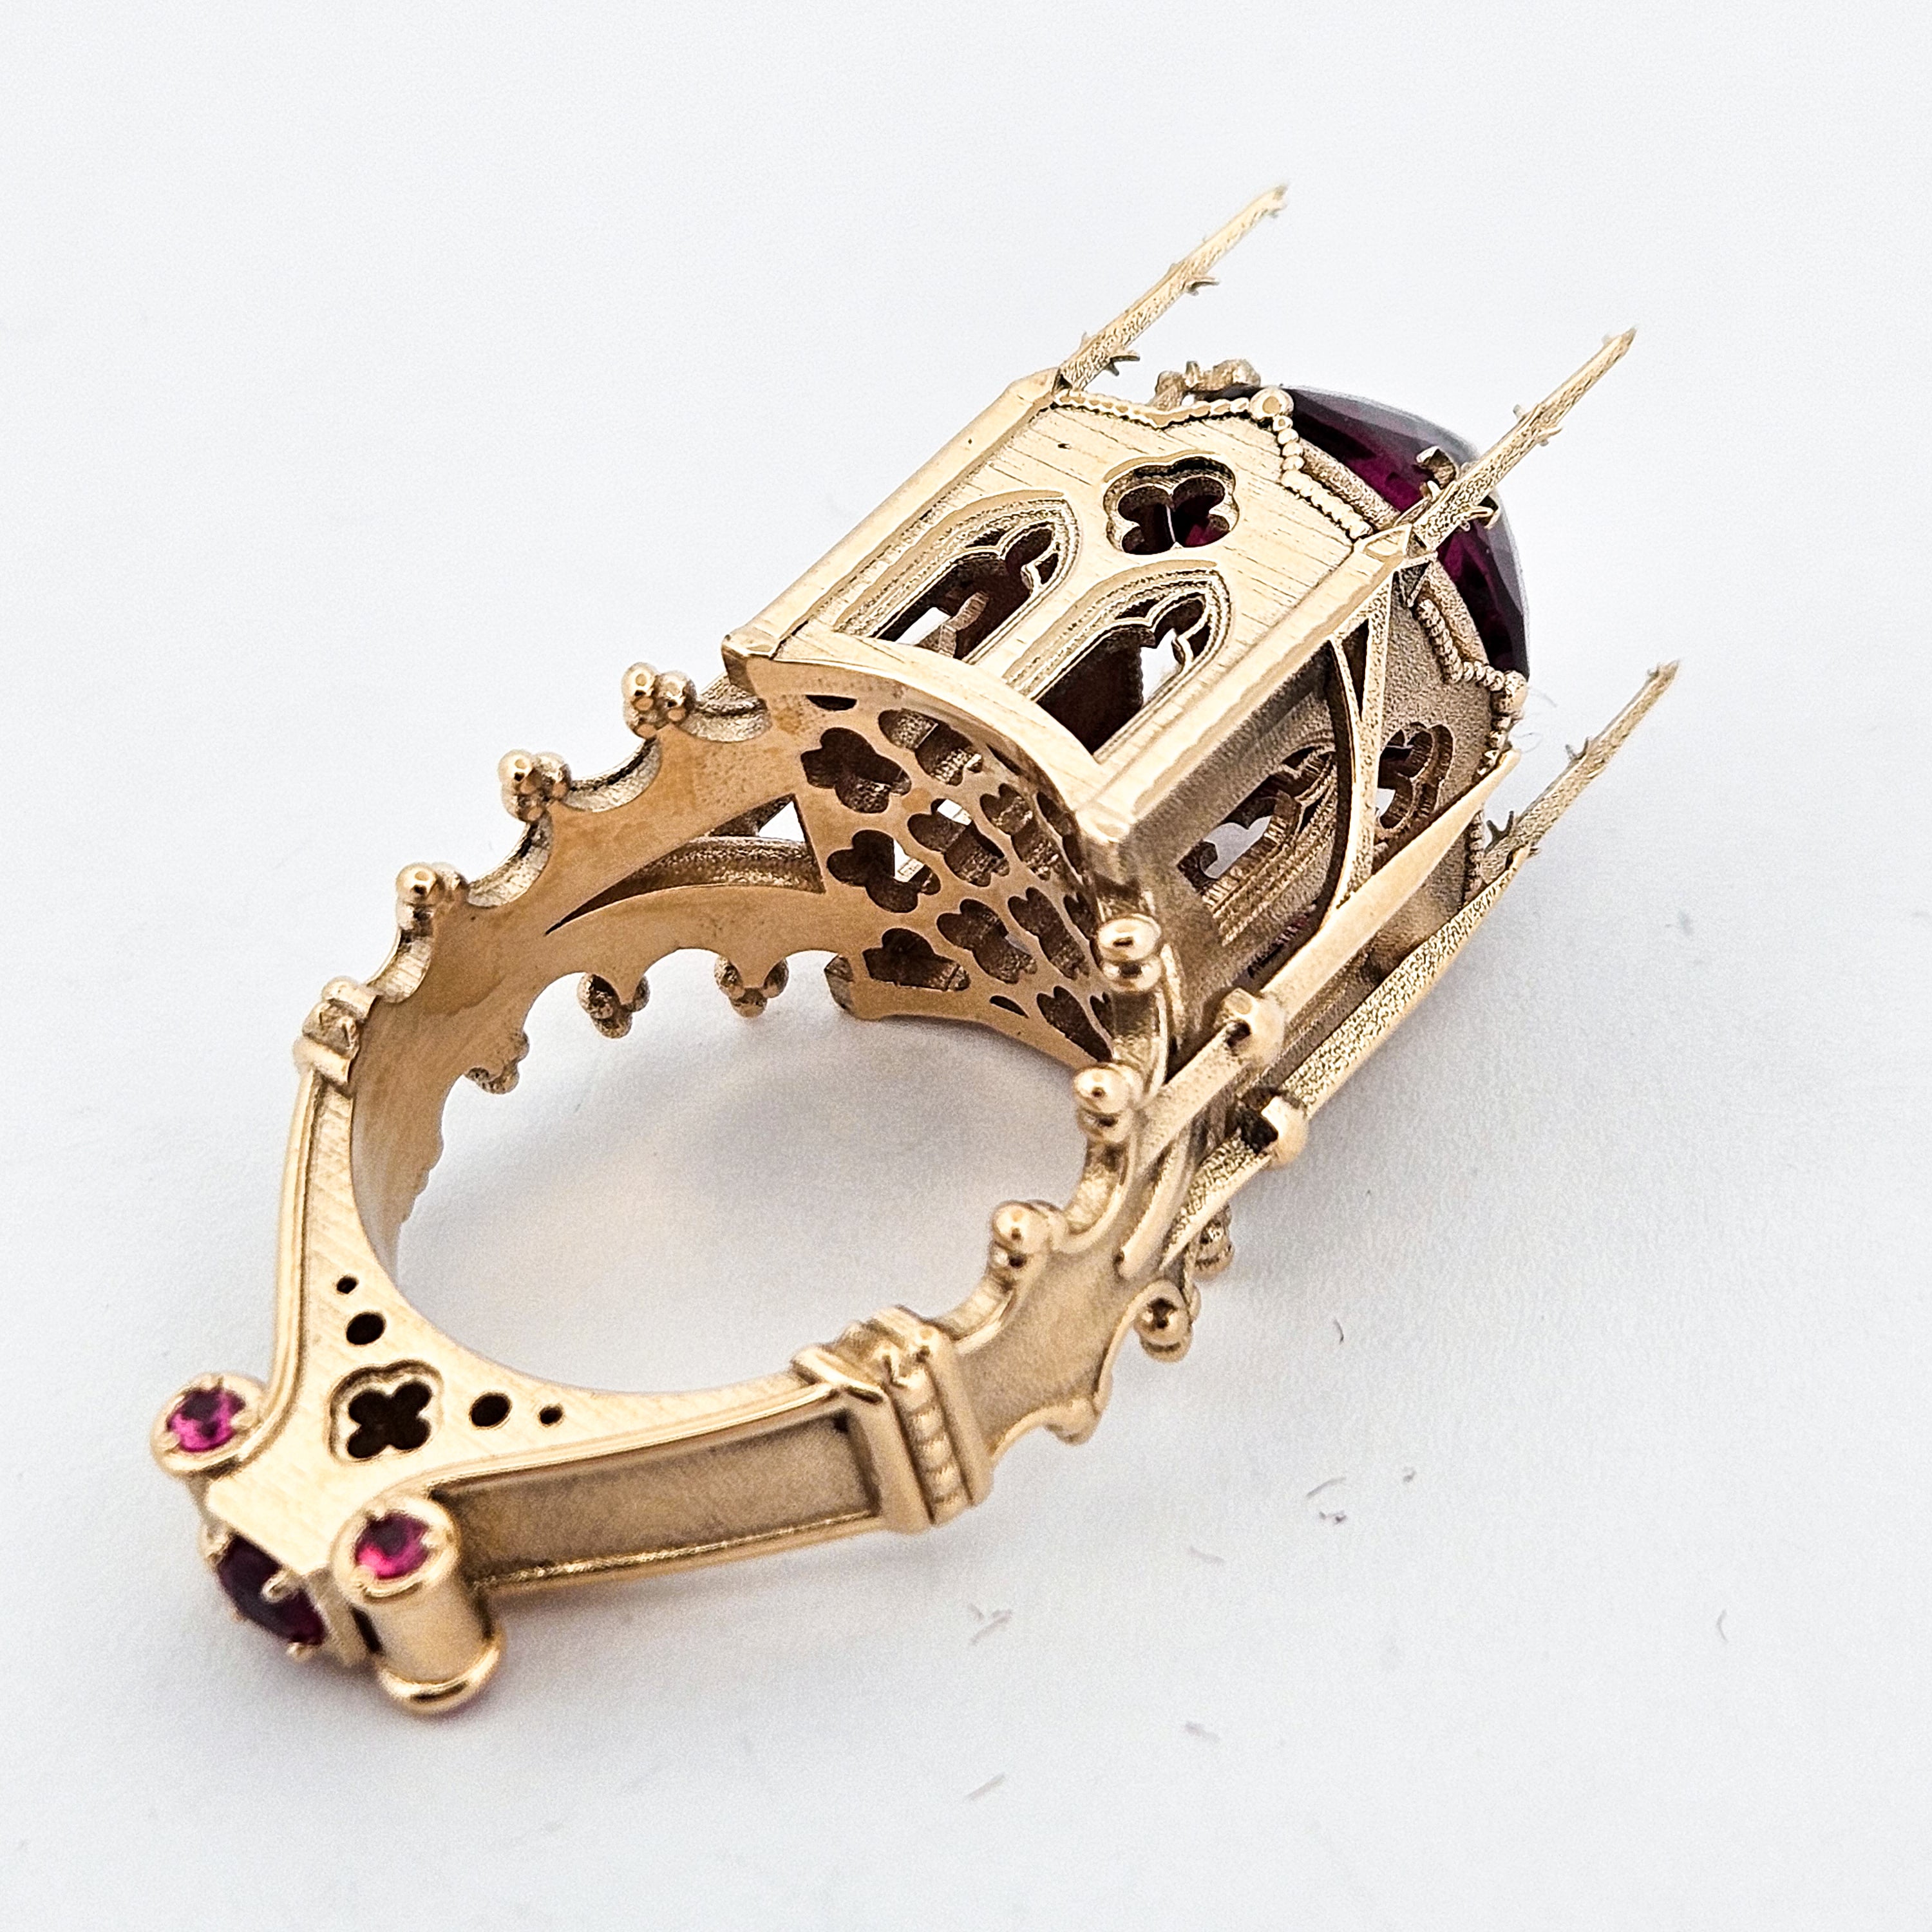 The Temple of Temptations - 14K Yellow Gold, Raspberry Garnet, Pink Spinelle and Ruby Ring